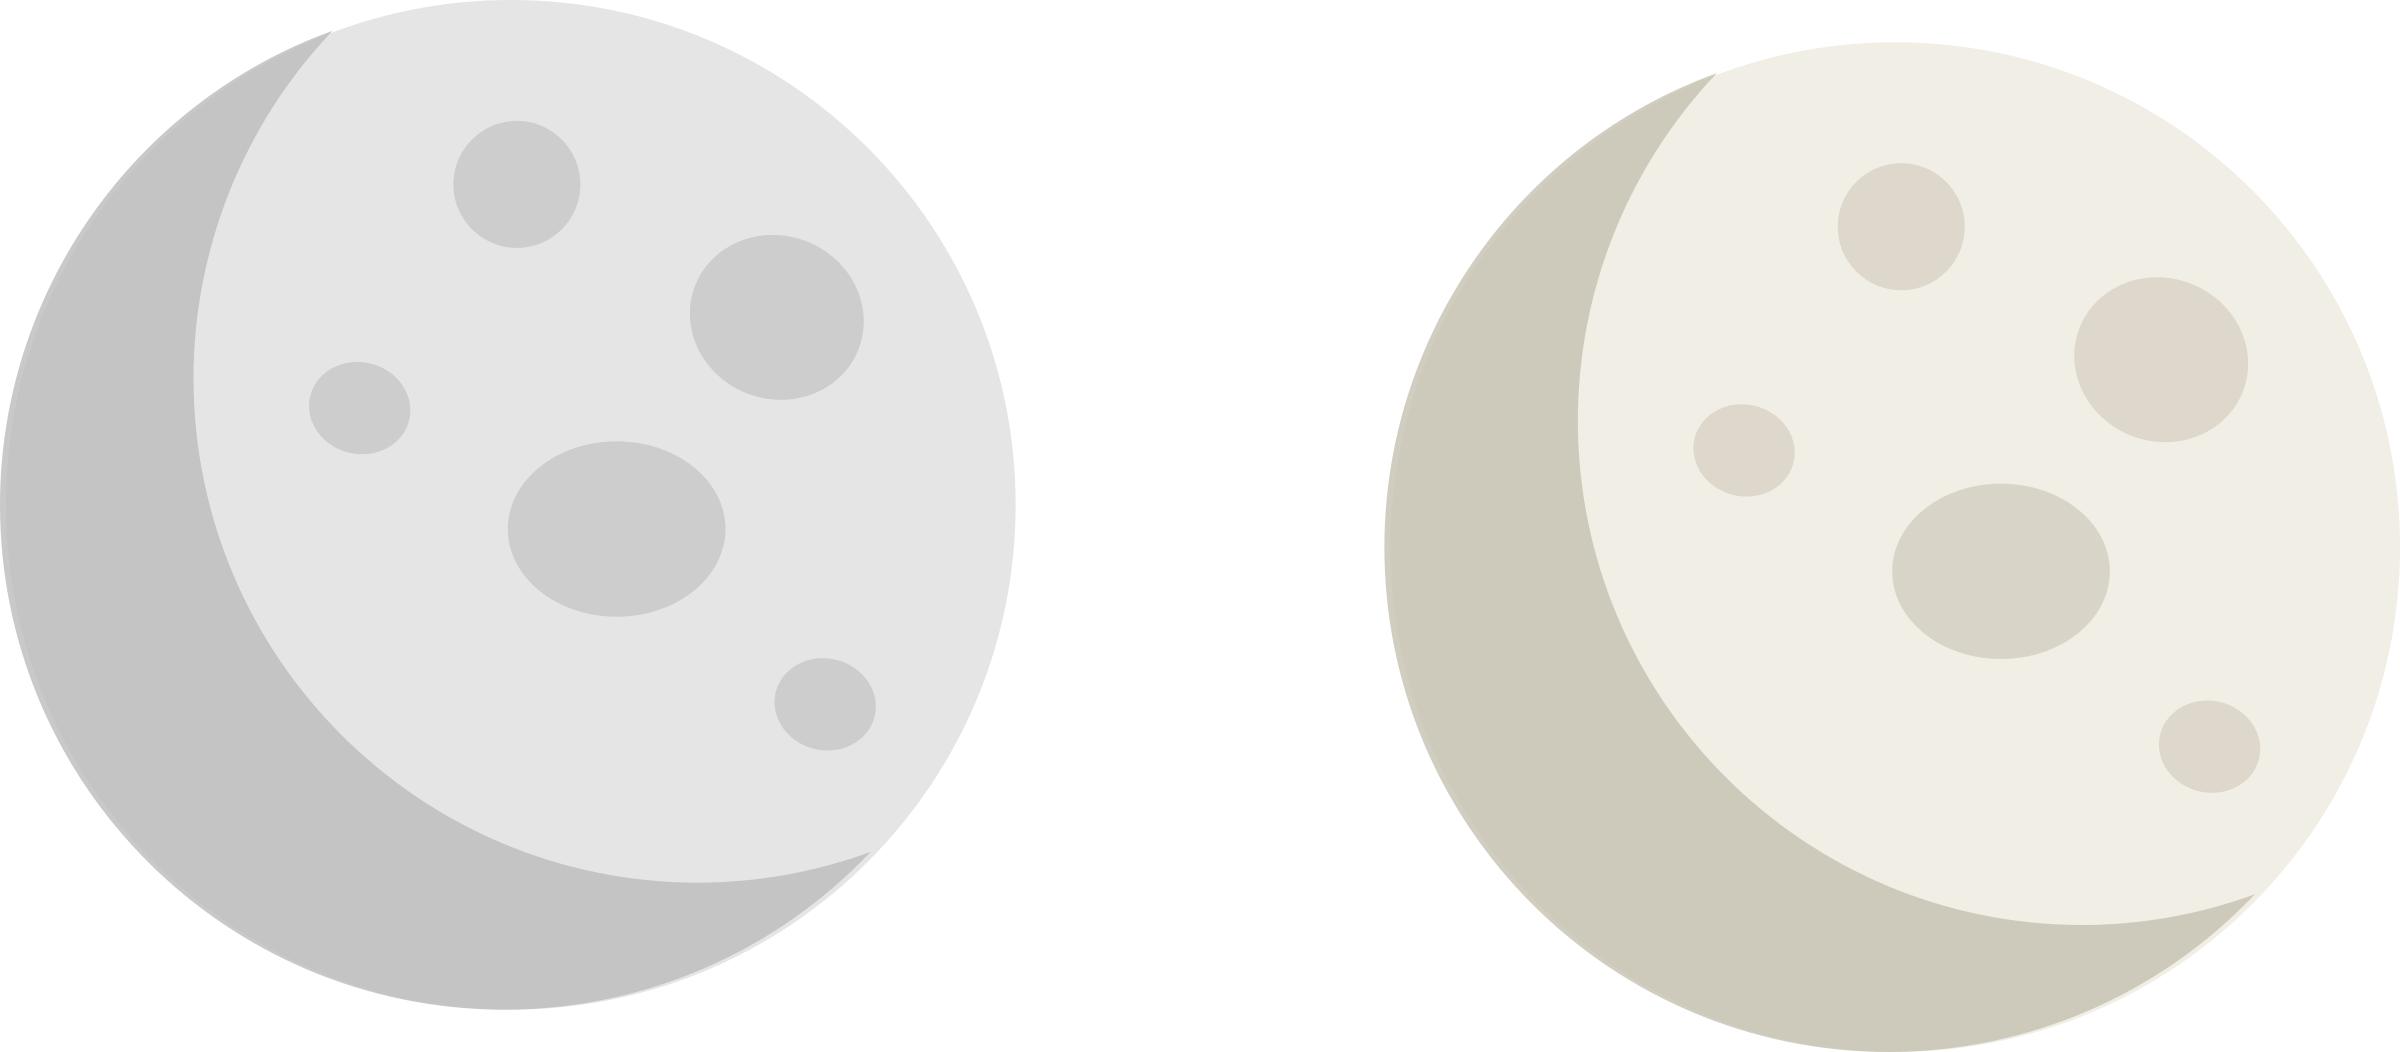 Moons png